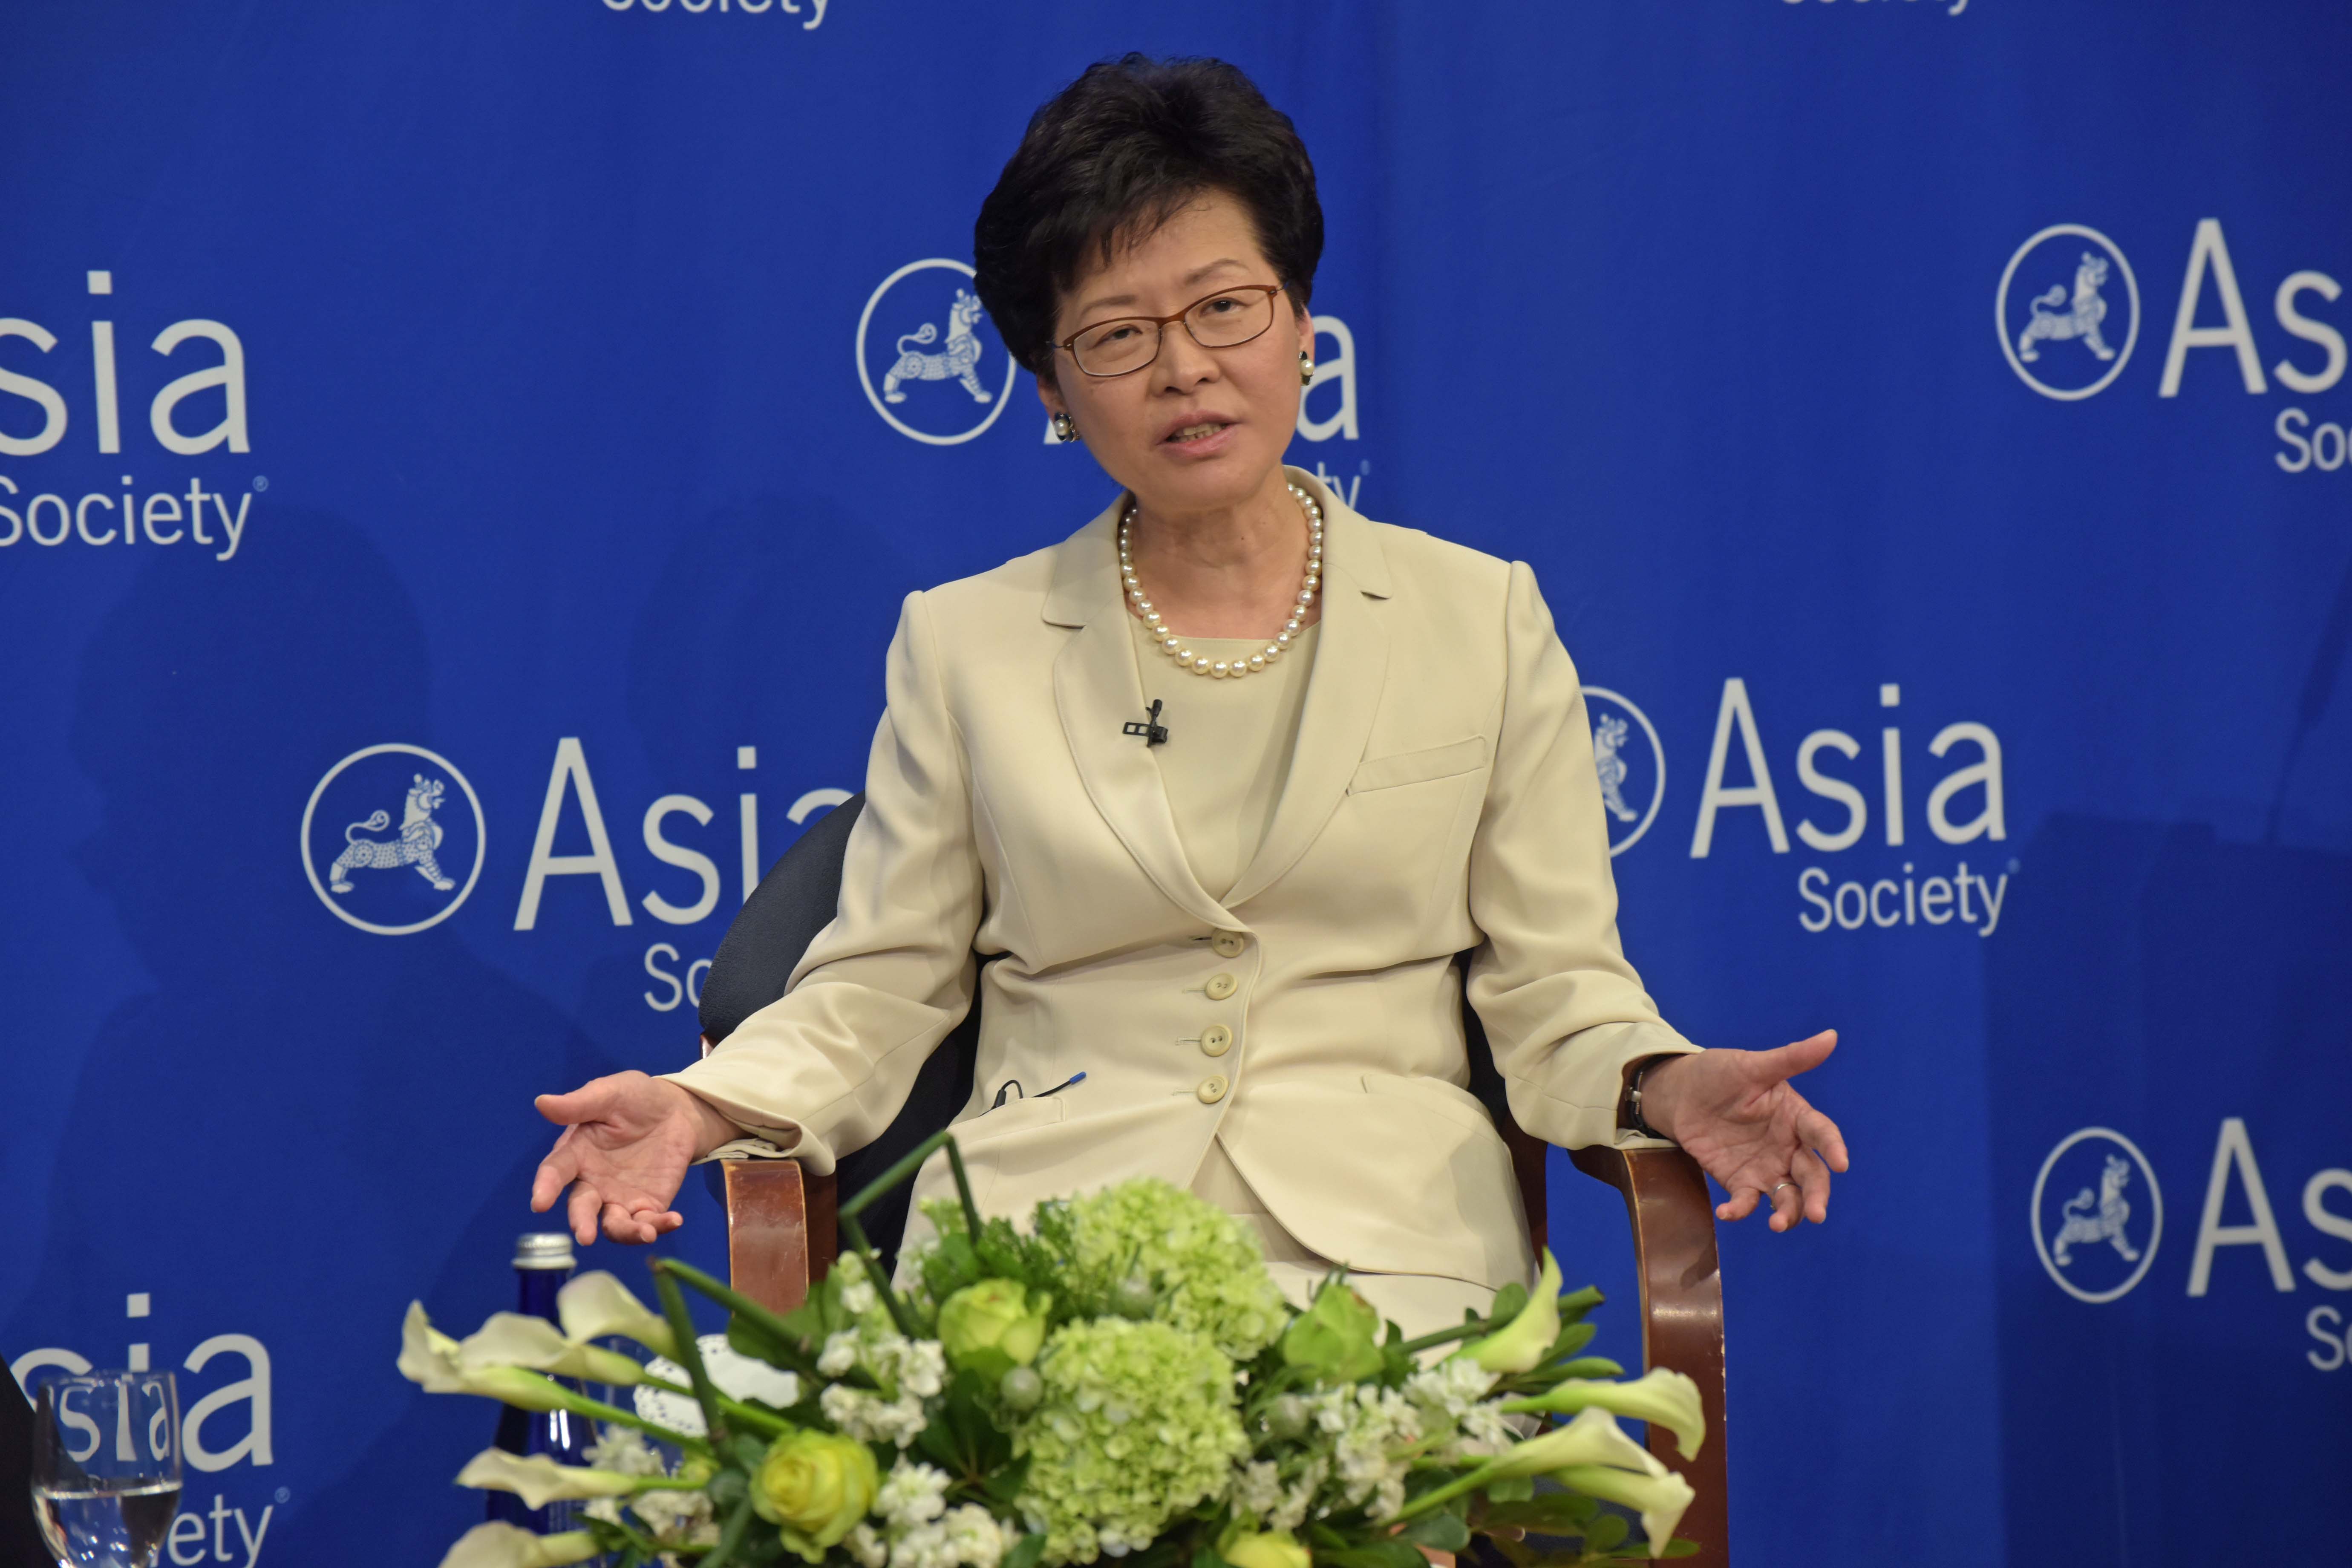 Chief Secretary of Hong Kong Carrie Lam (photo credit: Asia Society/flickr)